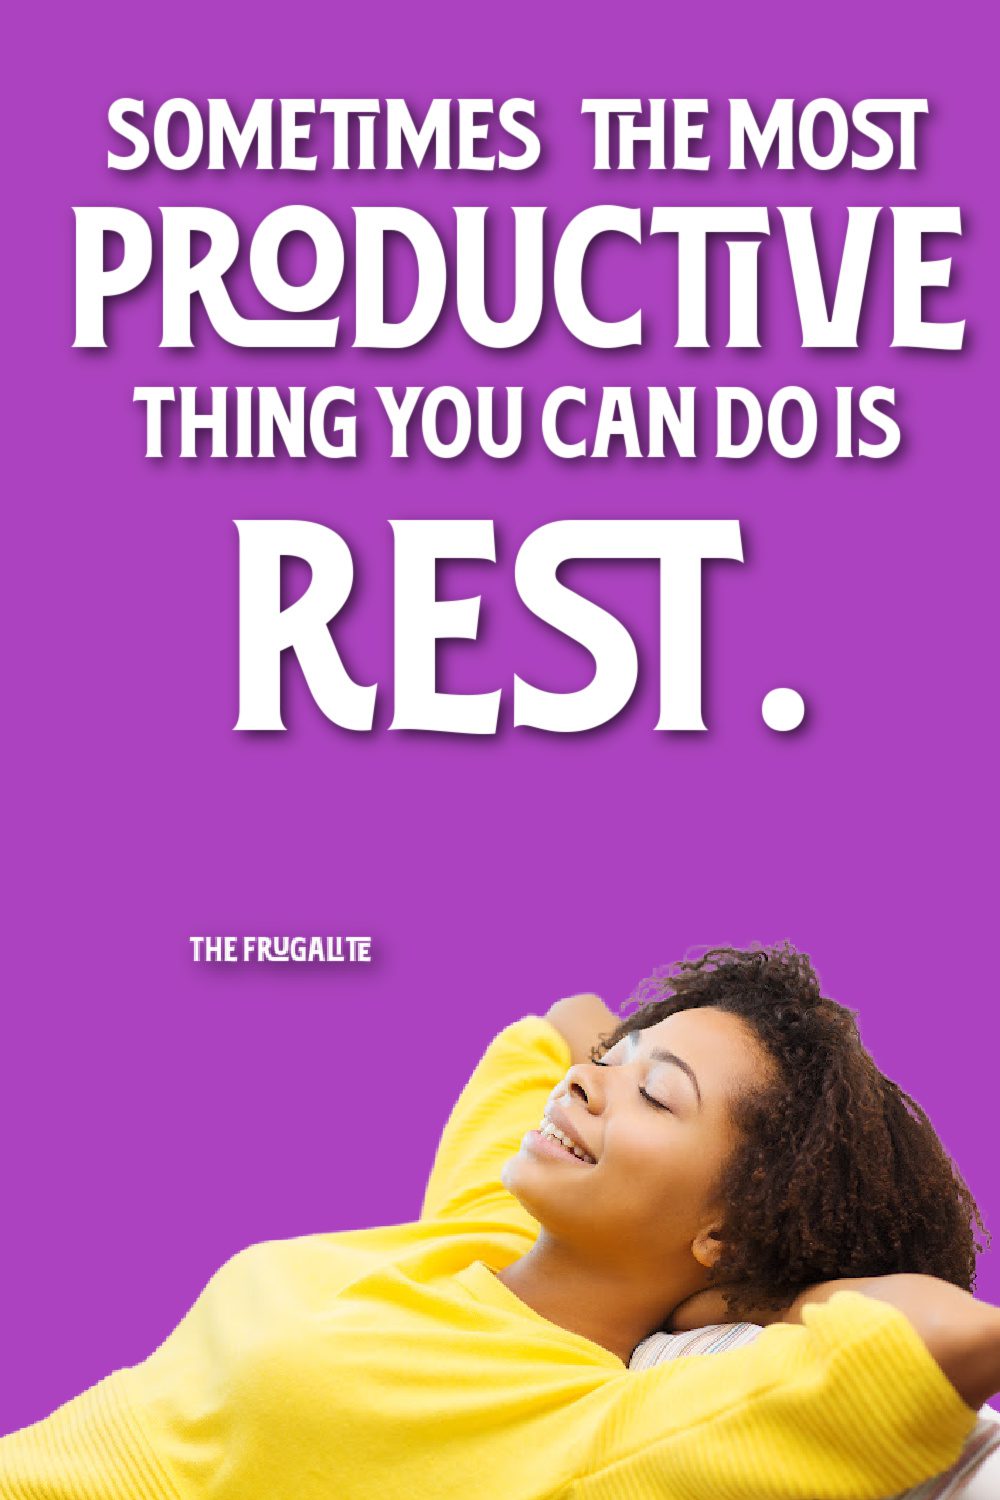 Sometimes, The Most Productive Thing You Can Do Is Rest